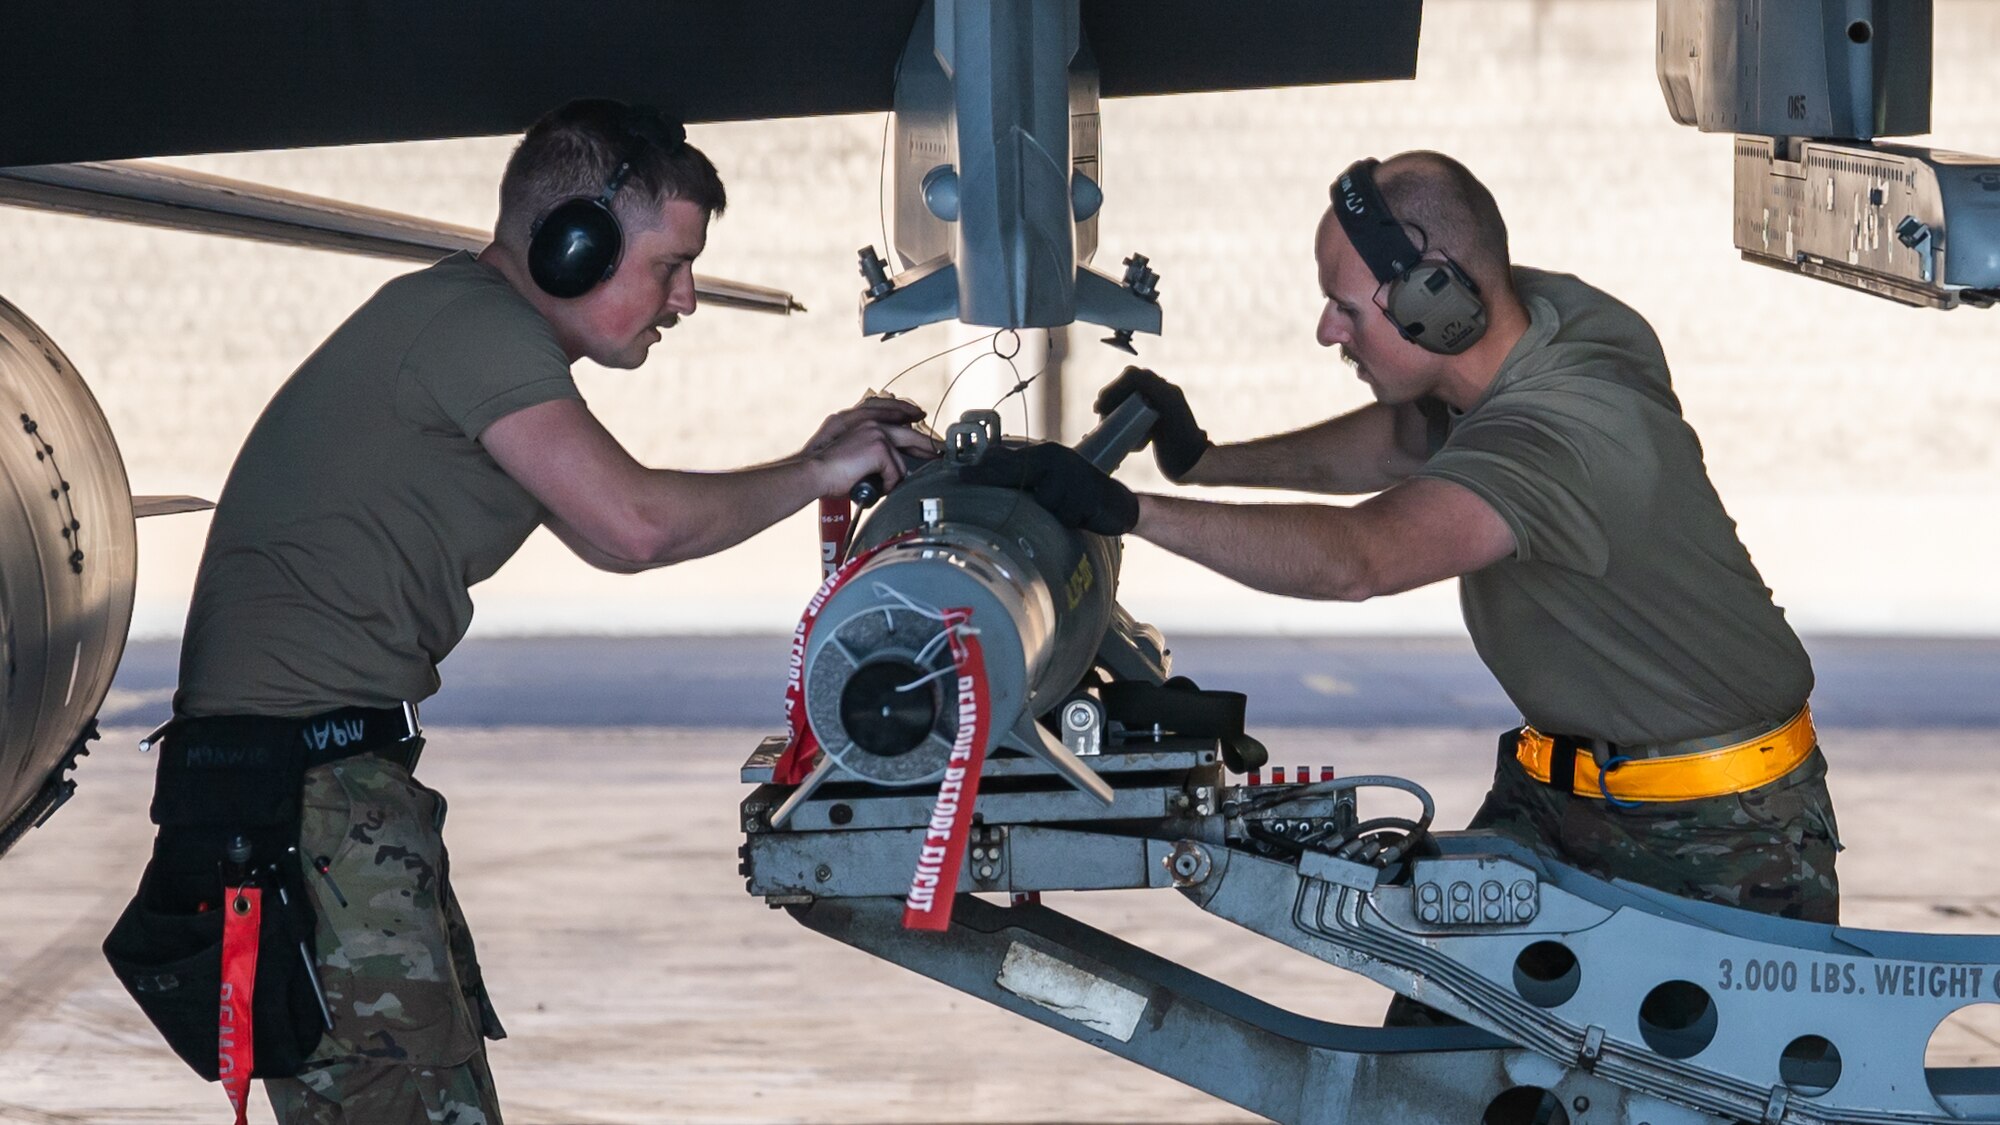 Staff Sgt. Turner Hombsch, 378th Expeditionary Maintenance Squadron aircraft armament systems specialist, and Tech Sgt. Joseph Wetzel, 378th EMXS weapons systems crew chief, load munitions onto an F-16 Fighting Falcon at King Fahad Air Base, Kingdom of Saudi Arabia, Dec. 7, 2021. The exercise tested the 378th Air Expeditionary Wing's Agile Combat Employment skills to rapidly deploy and maneuver around the U.S. Central Command area of responsibility. (U.S. Air Force photo by Senior Airman Jacob B. Wrightsman)